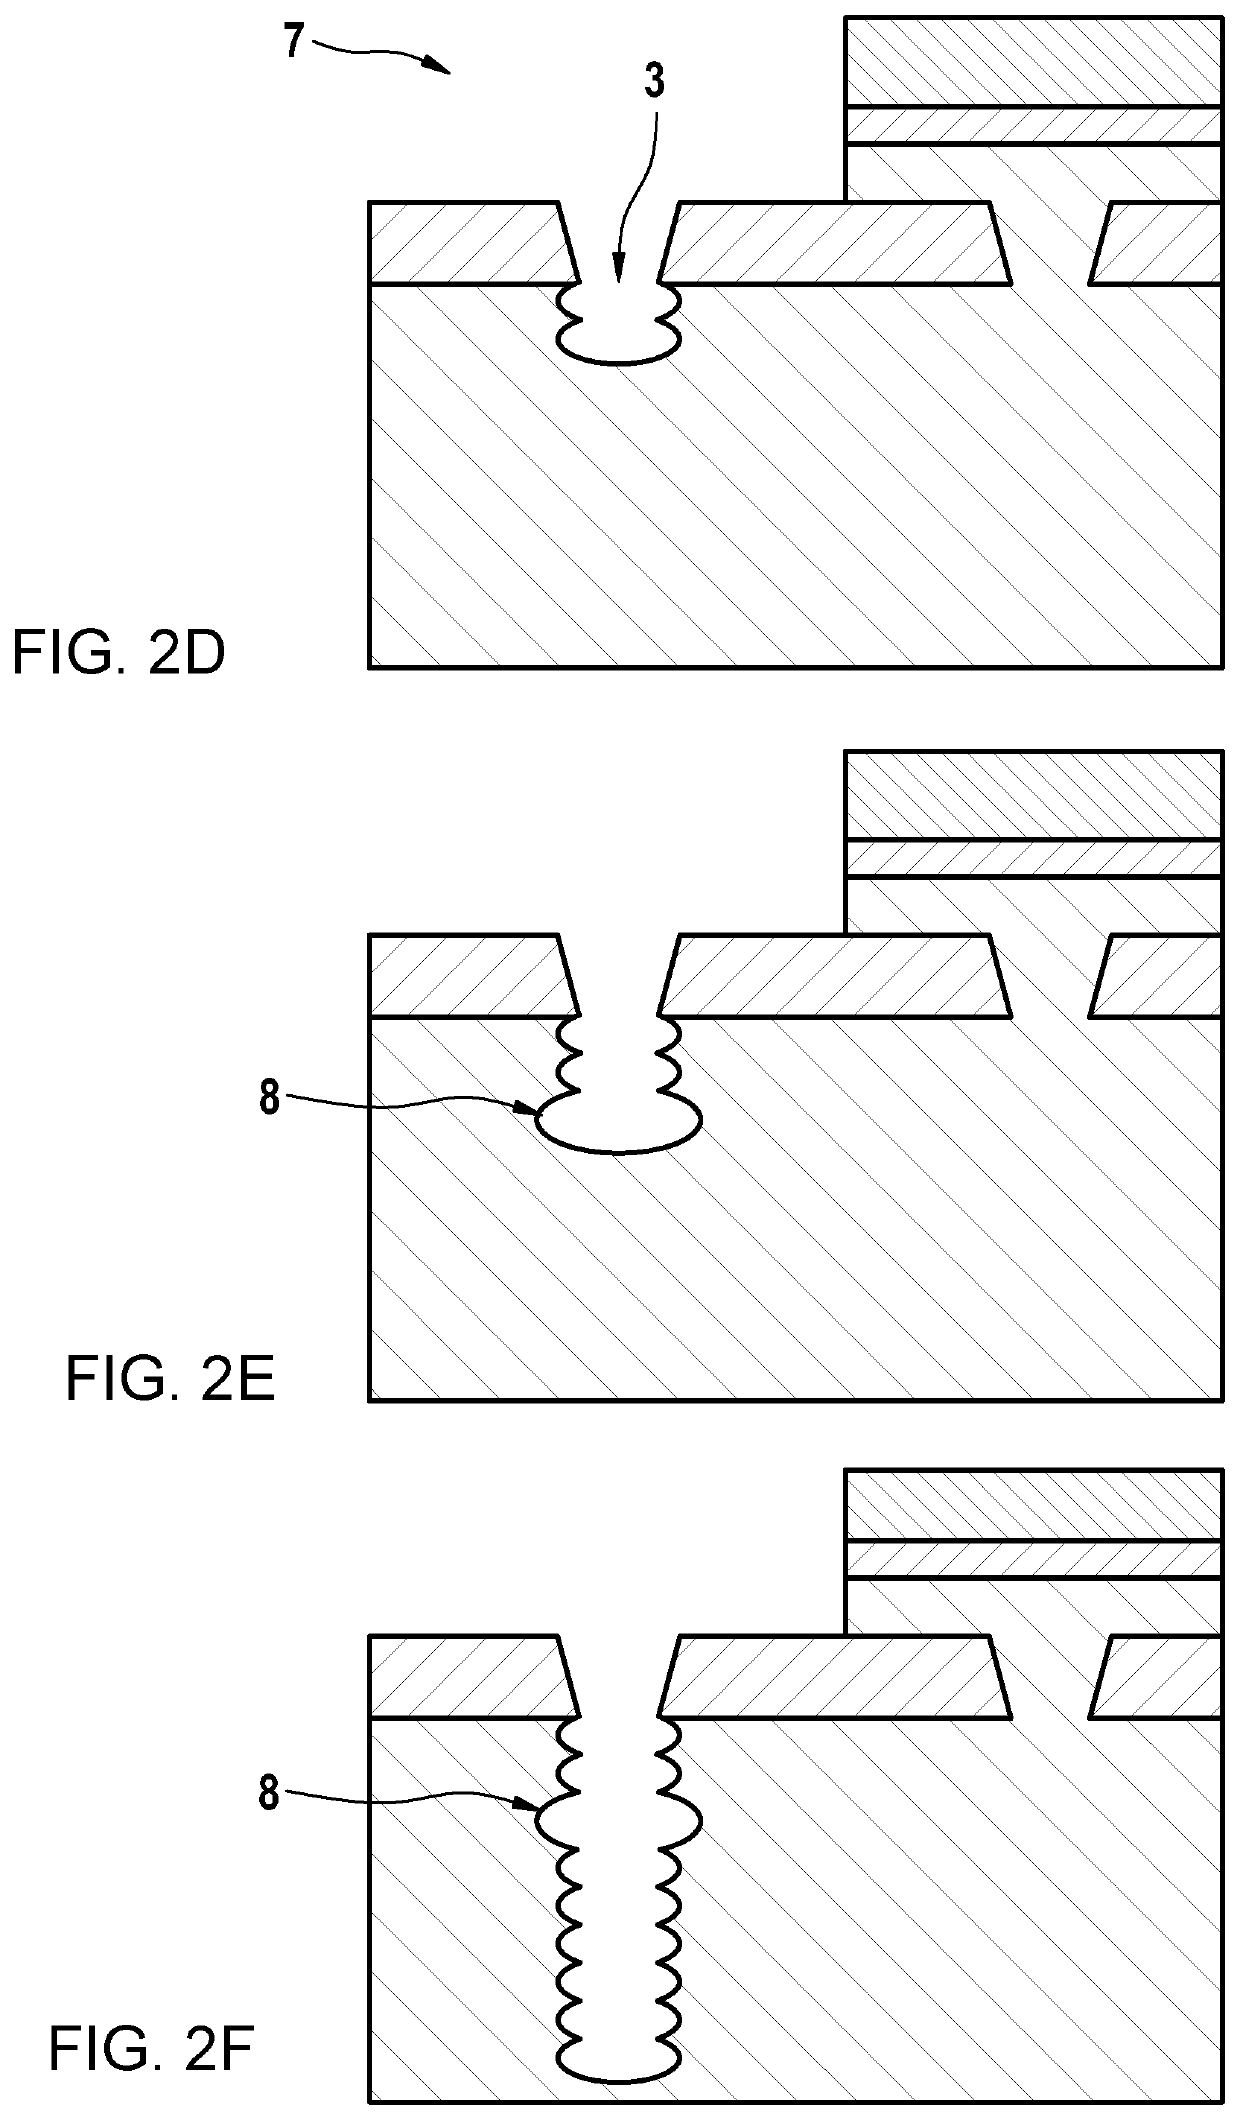 Method for forming a trench in a first semiconductor layer of a multi-layer system